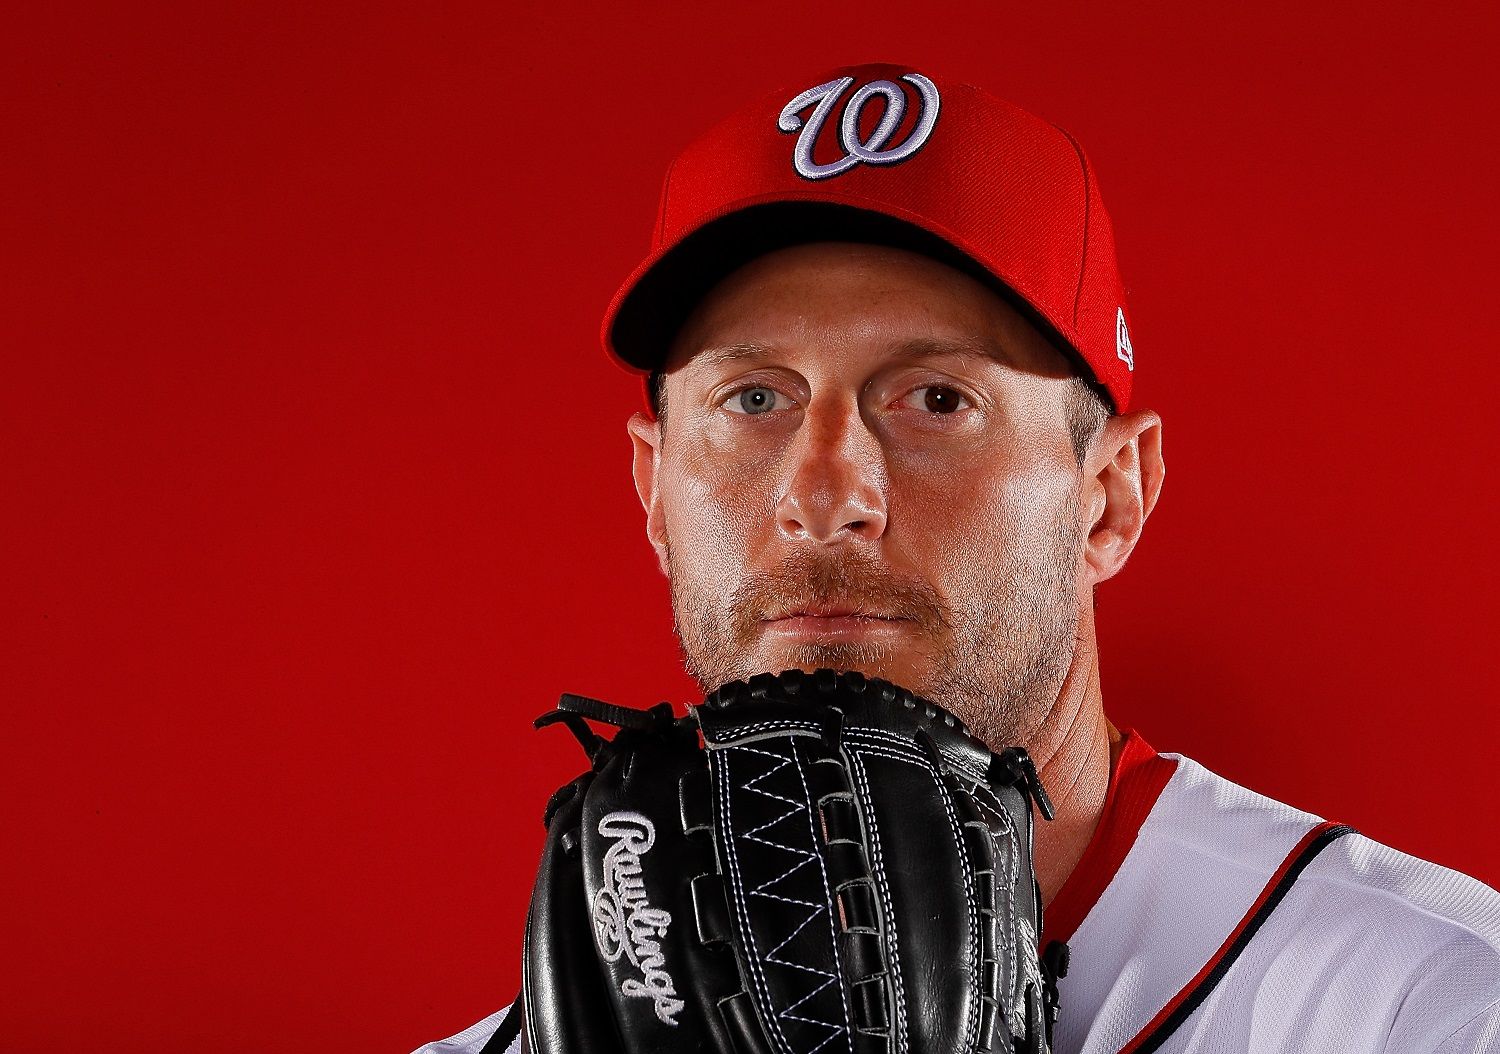 WEST PALM BEACH, FL - FEBRUARY 22:  Max Scherzer #31 of the Washington Nationals poses for a photo during photo days at The Ballpark of the Palm Beaches on February 22, 2018 in West Palm Beach, Florida.  (Photo by Kevin C. Cox/Getty Images)